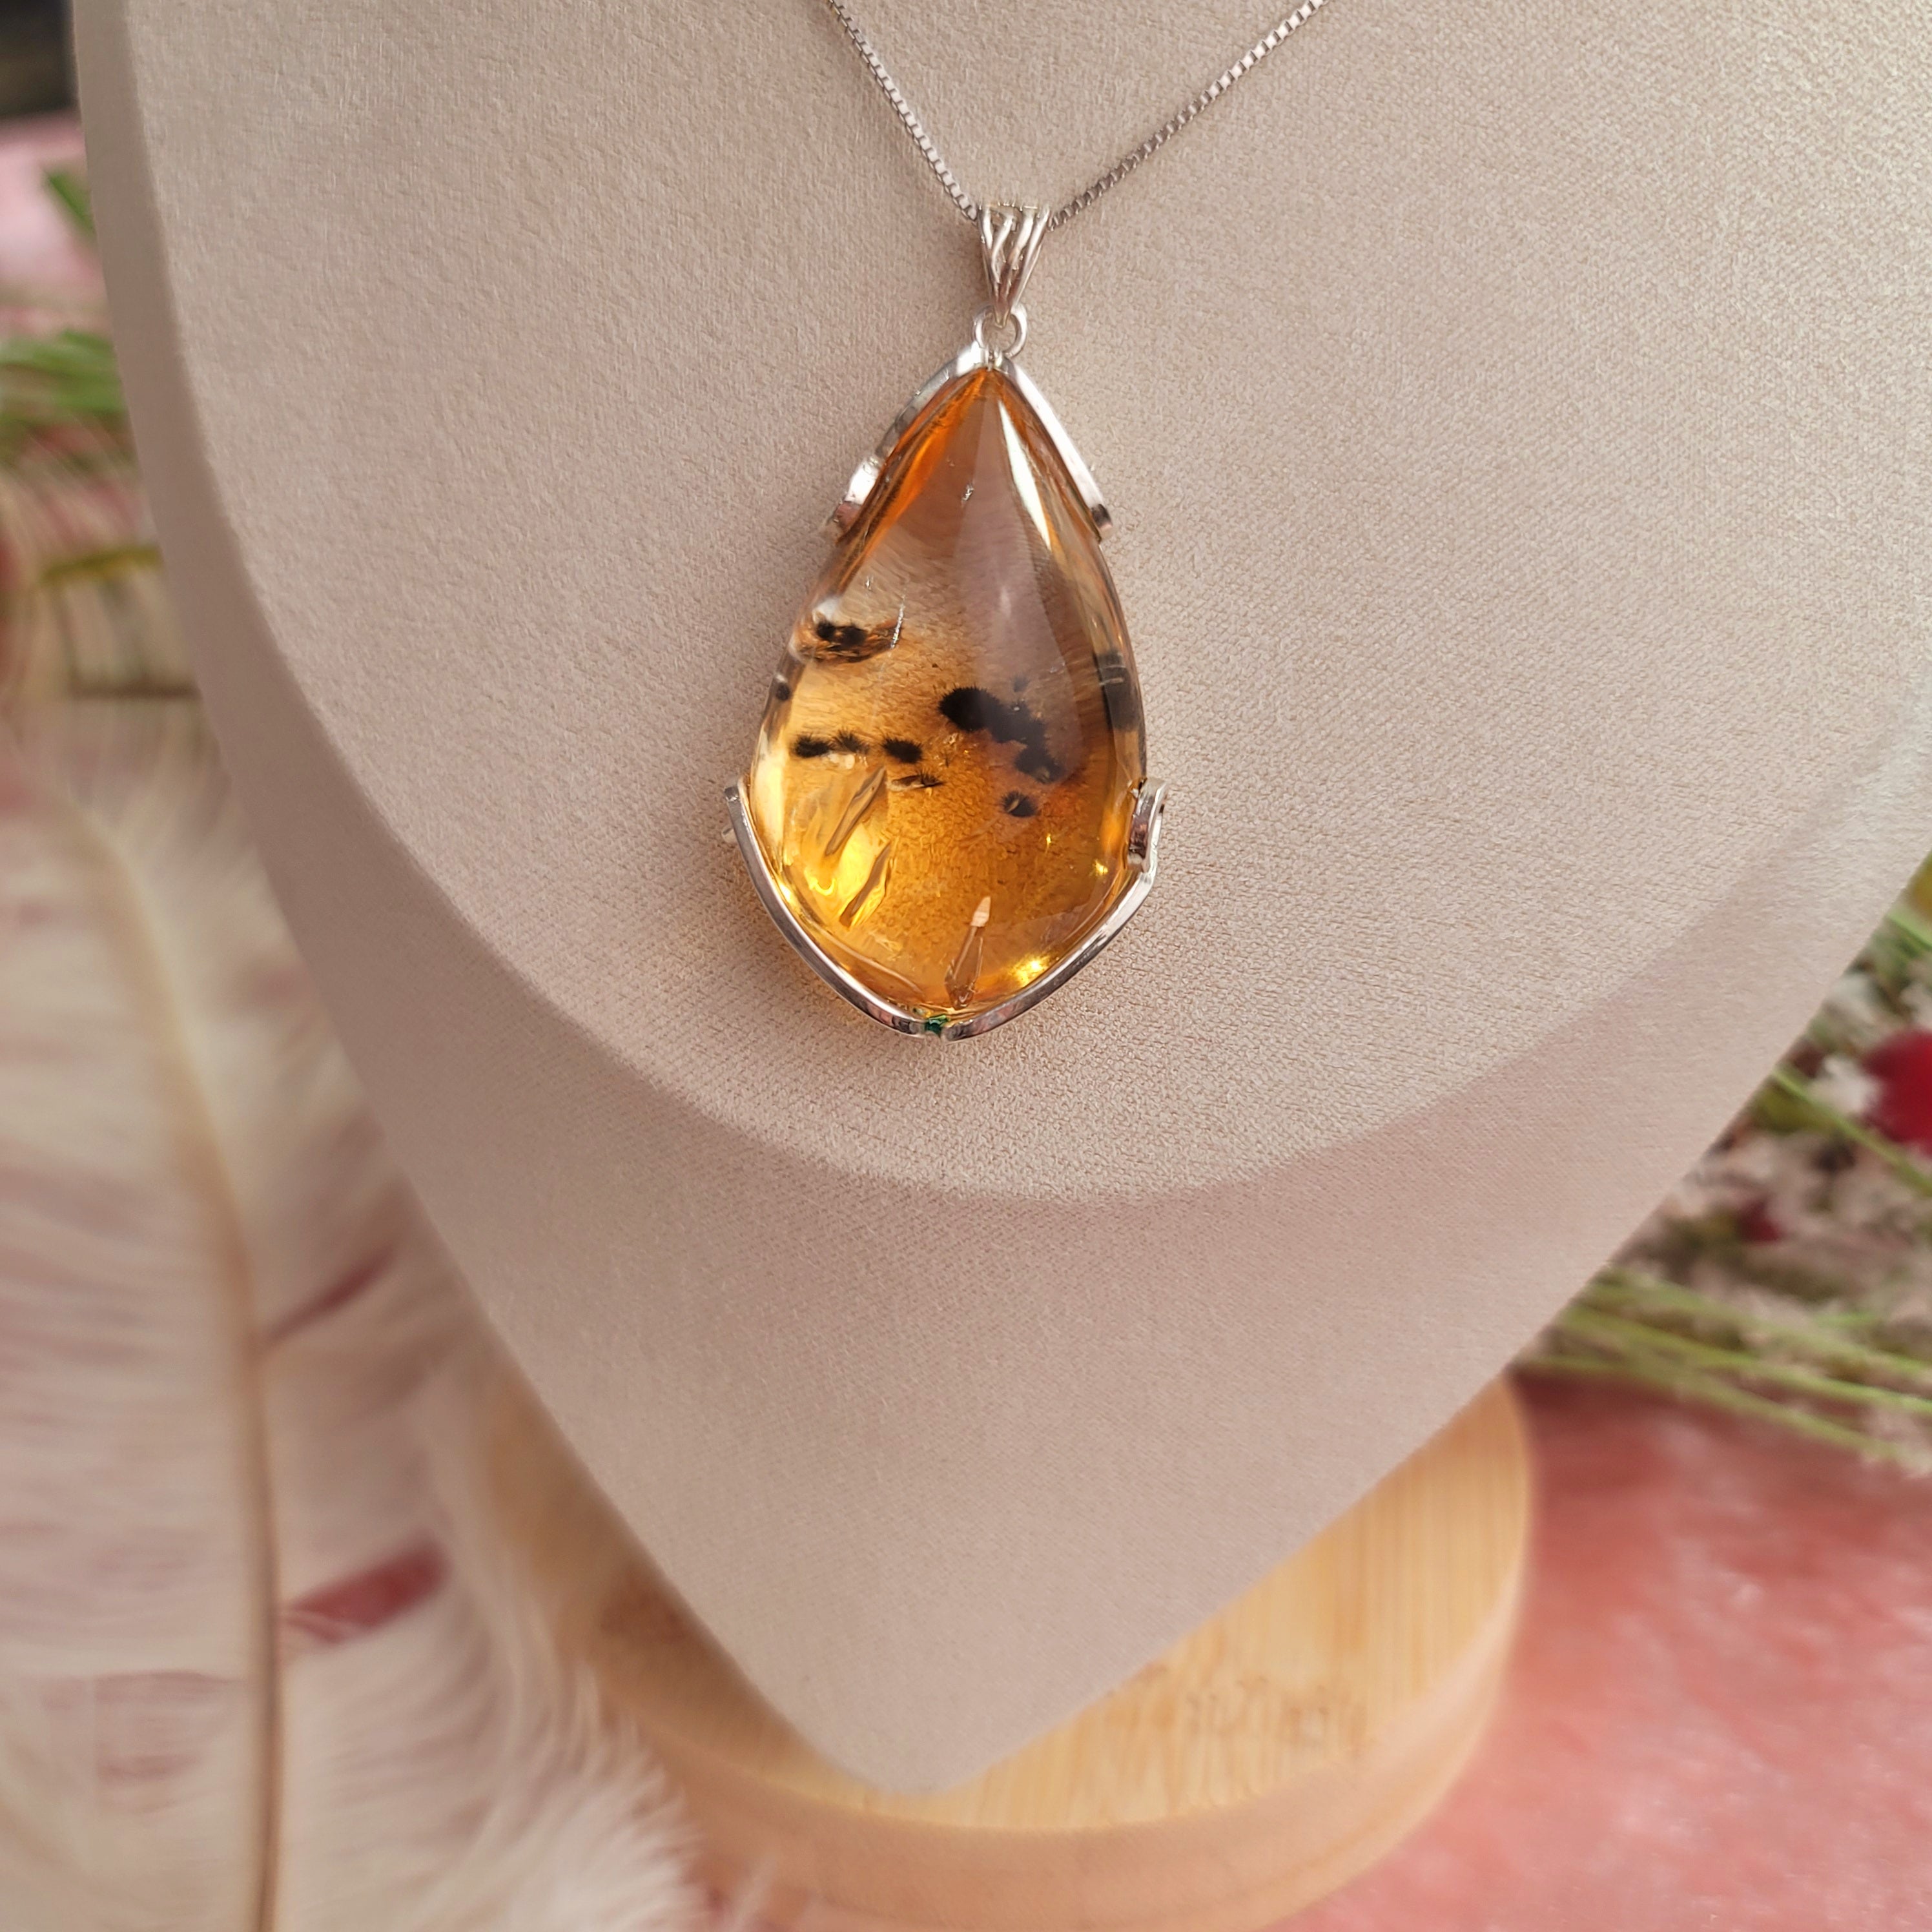 Citrine with Hollandite Inclusion Necklace for Attracting Abundance and Positivity